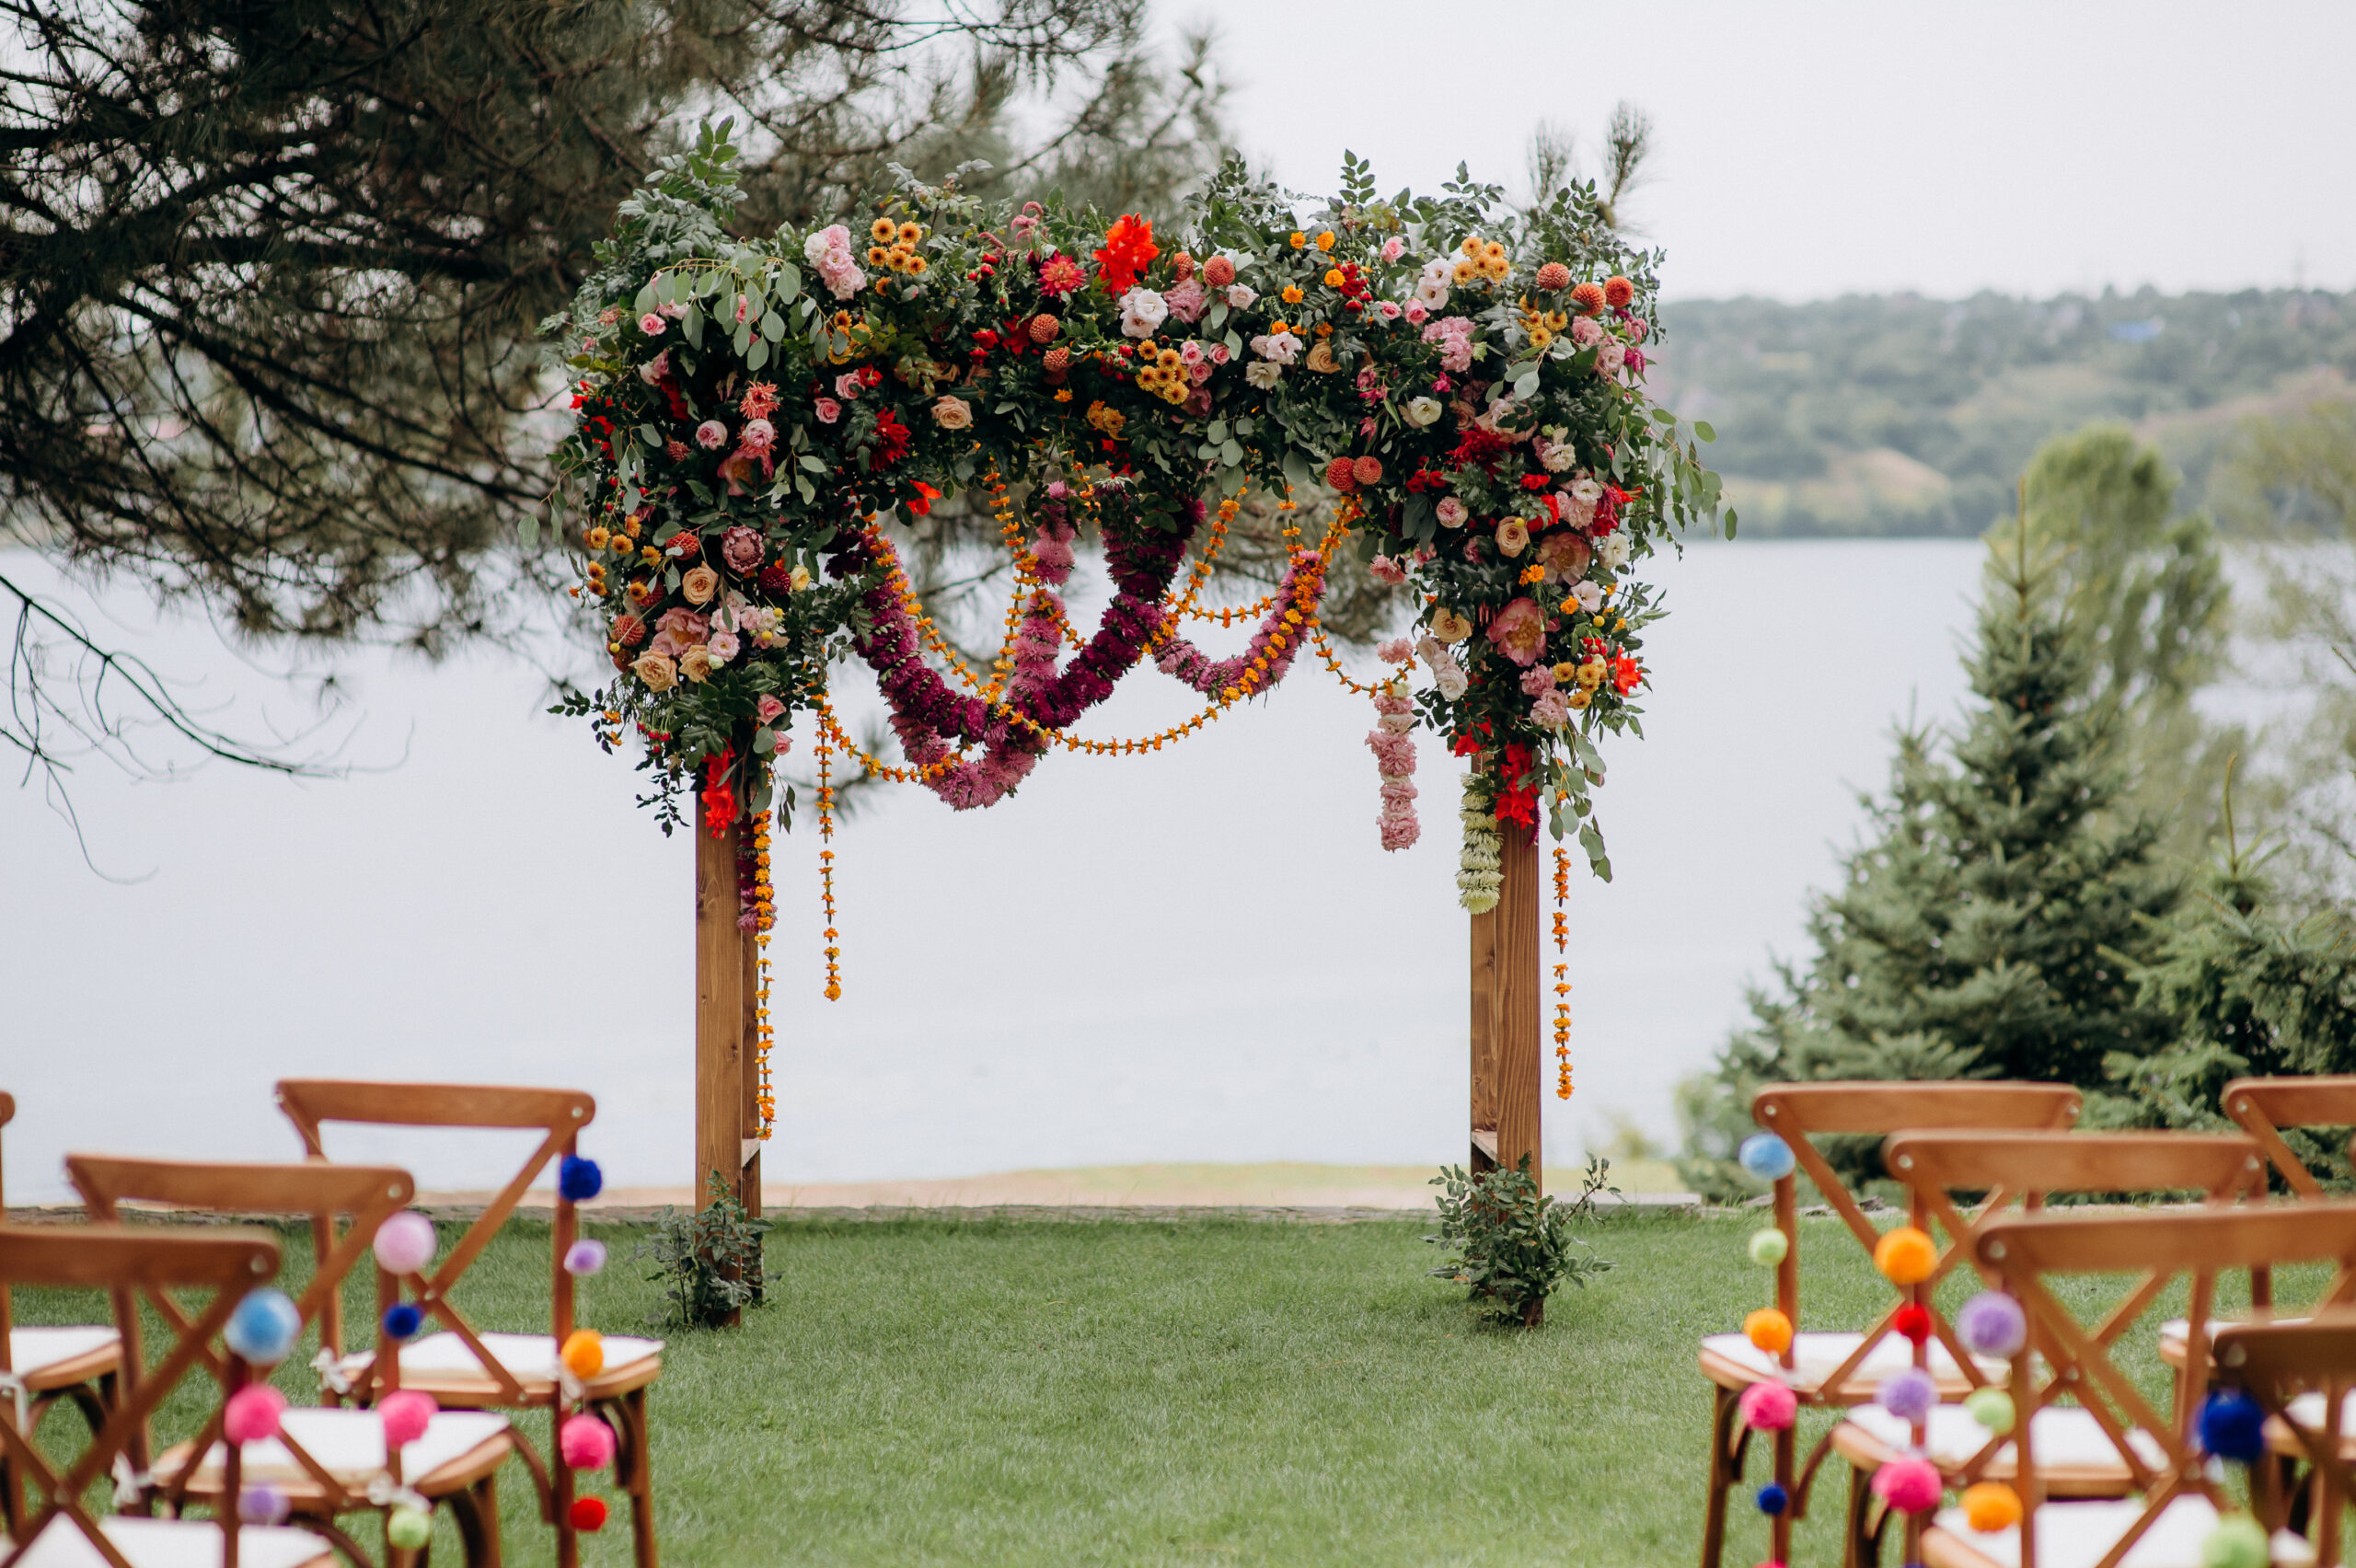 A wedding arch with lush greenery and accents of vibrant pink, orange, and yellow flowers set by a lakeside.